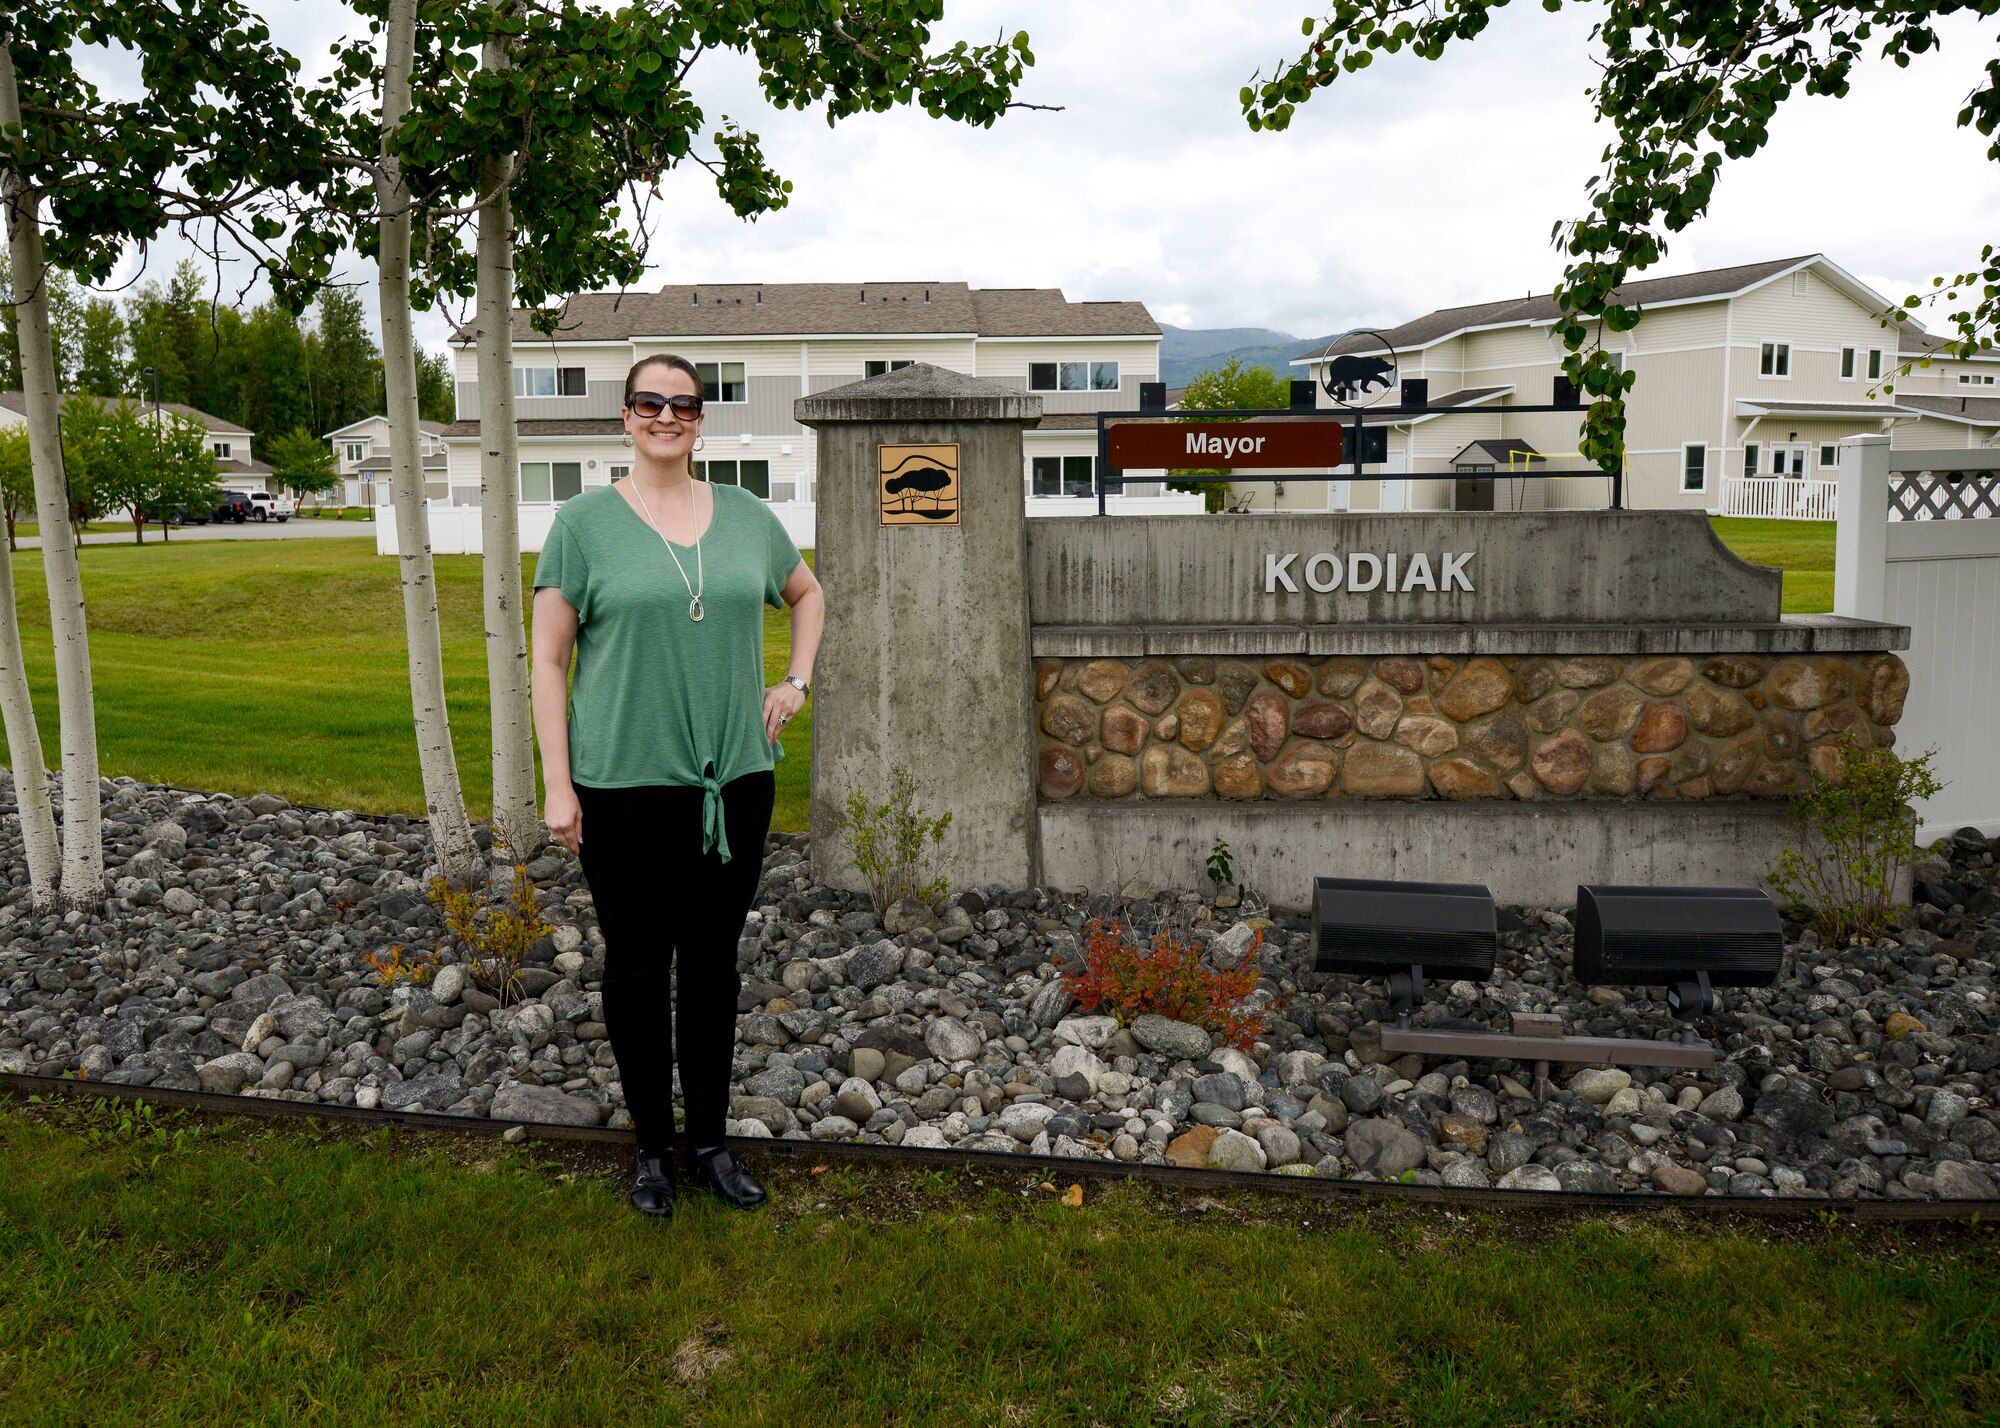 The 673d ABW privatized housing resident advocate stands in front of the Kodiak neighborhood sign